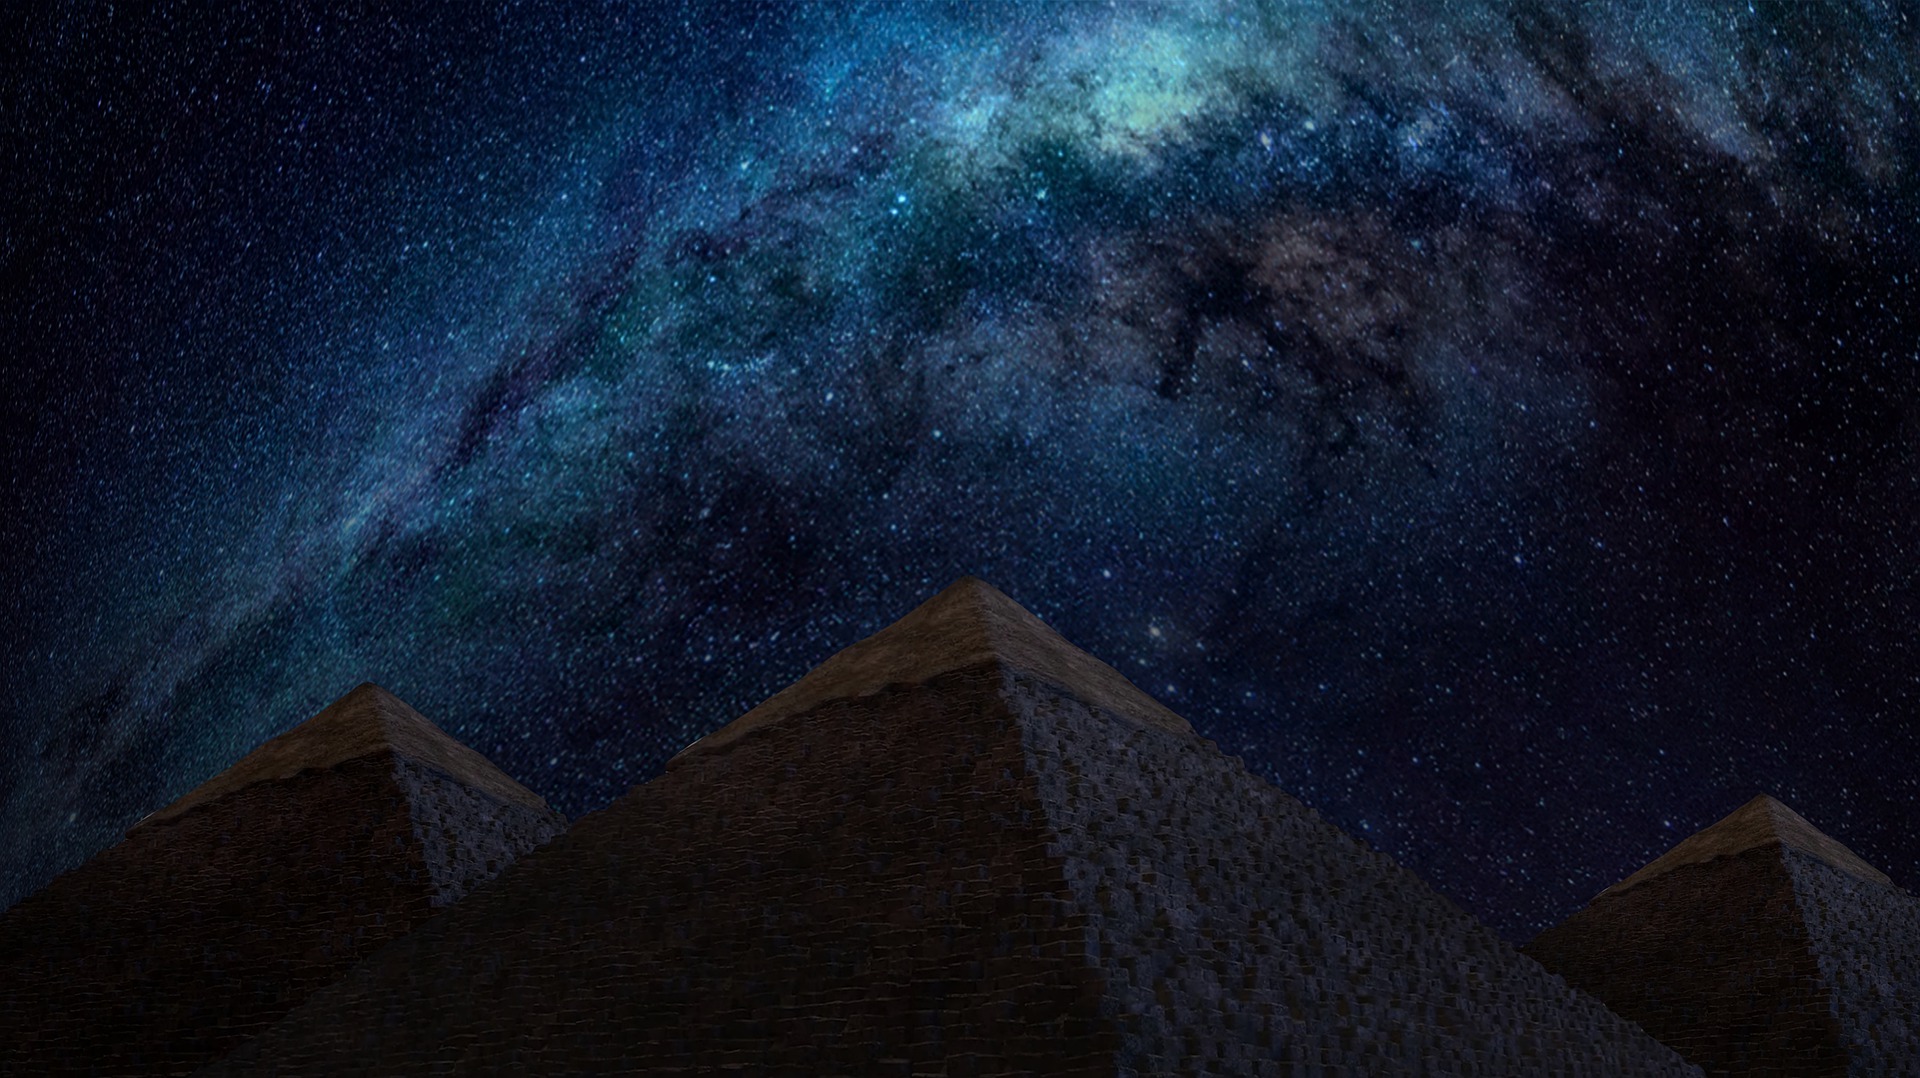 How did the ancient Egyptians see the Milky Way?